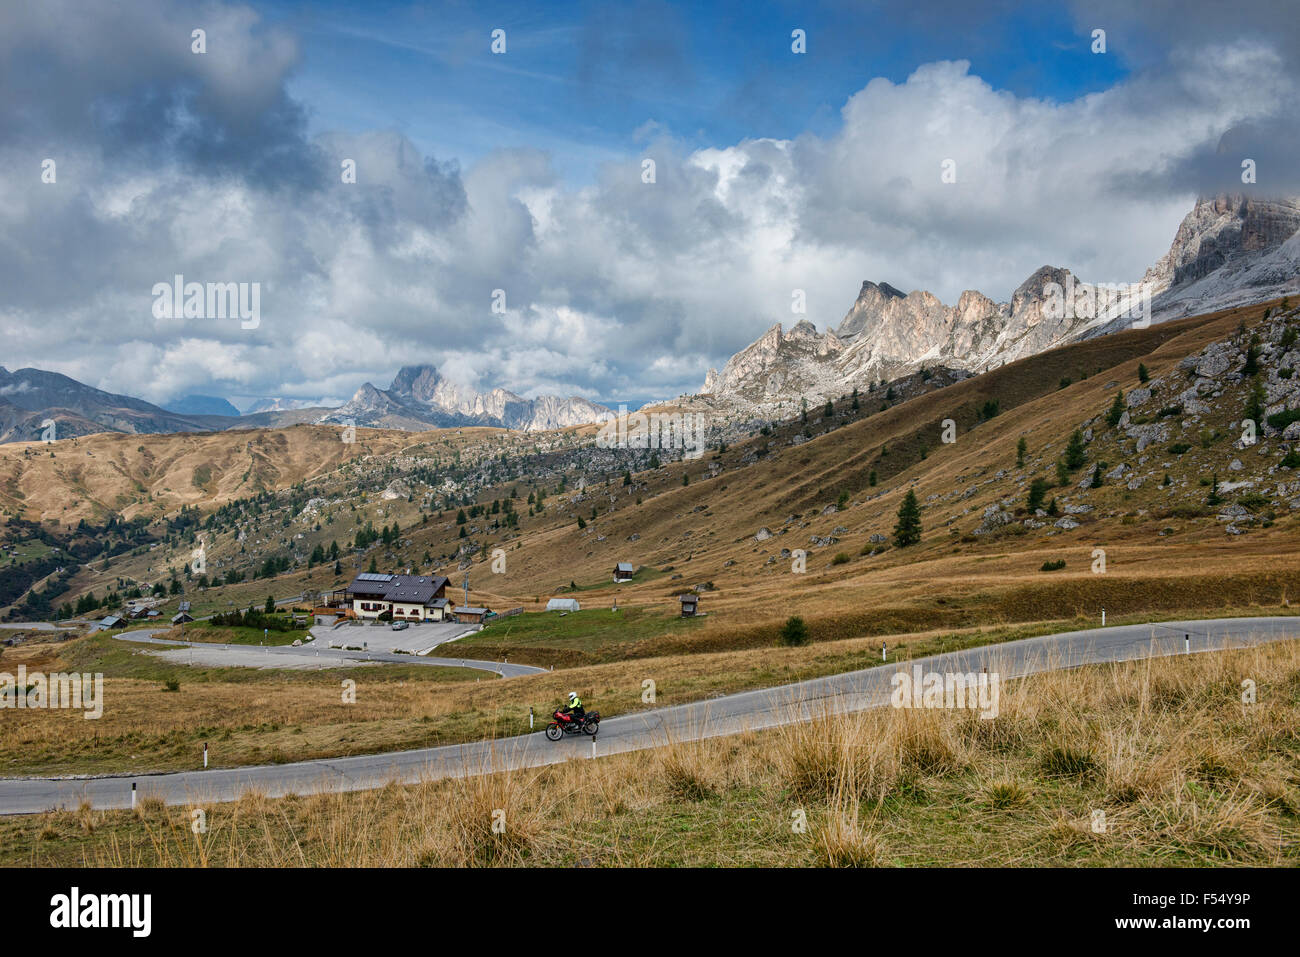 Motorcylist crossing the Passo Giau in the Dolomites, Belluno, Italy Stock Photo